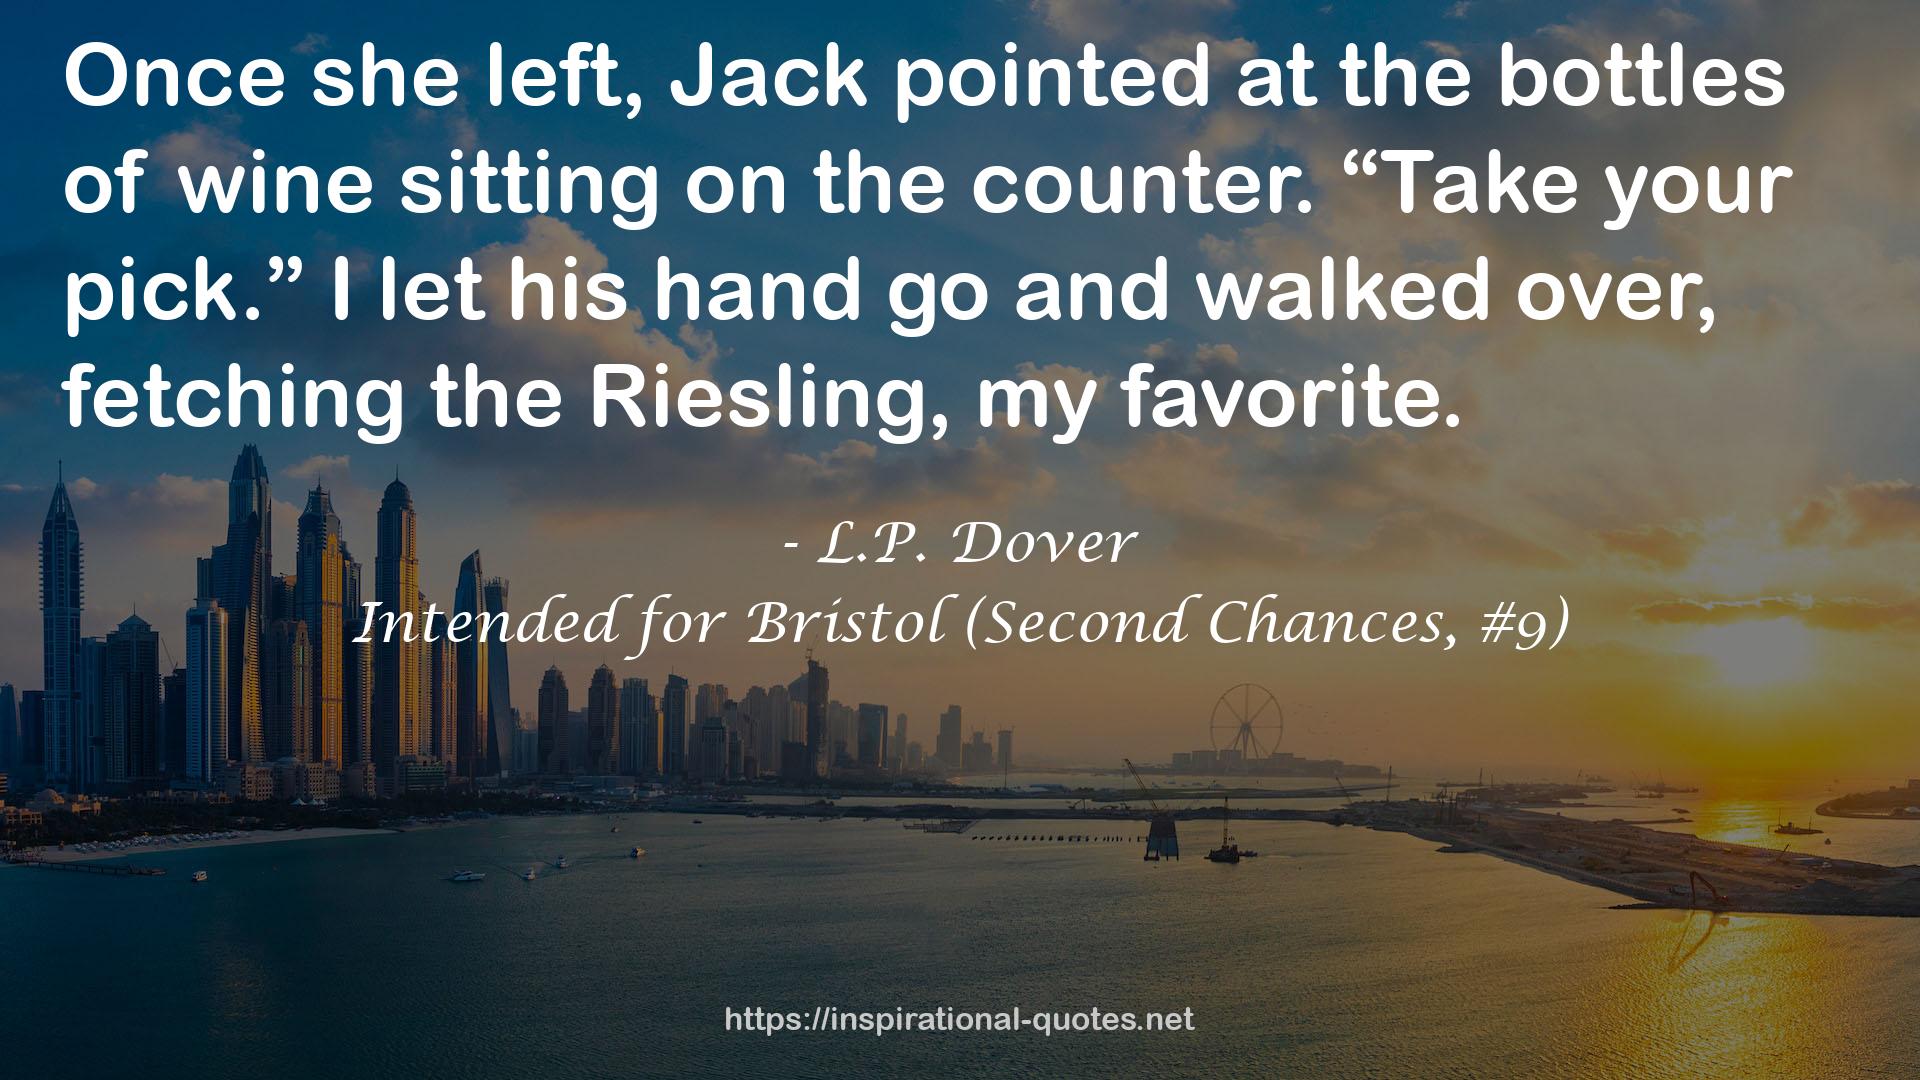 Intended for Bristol (Second Chances, #9) QUOTES